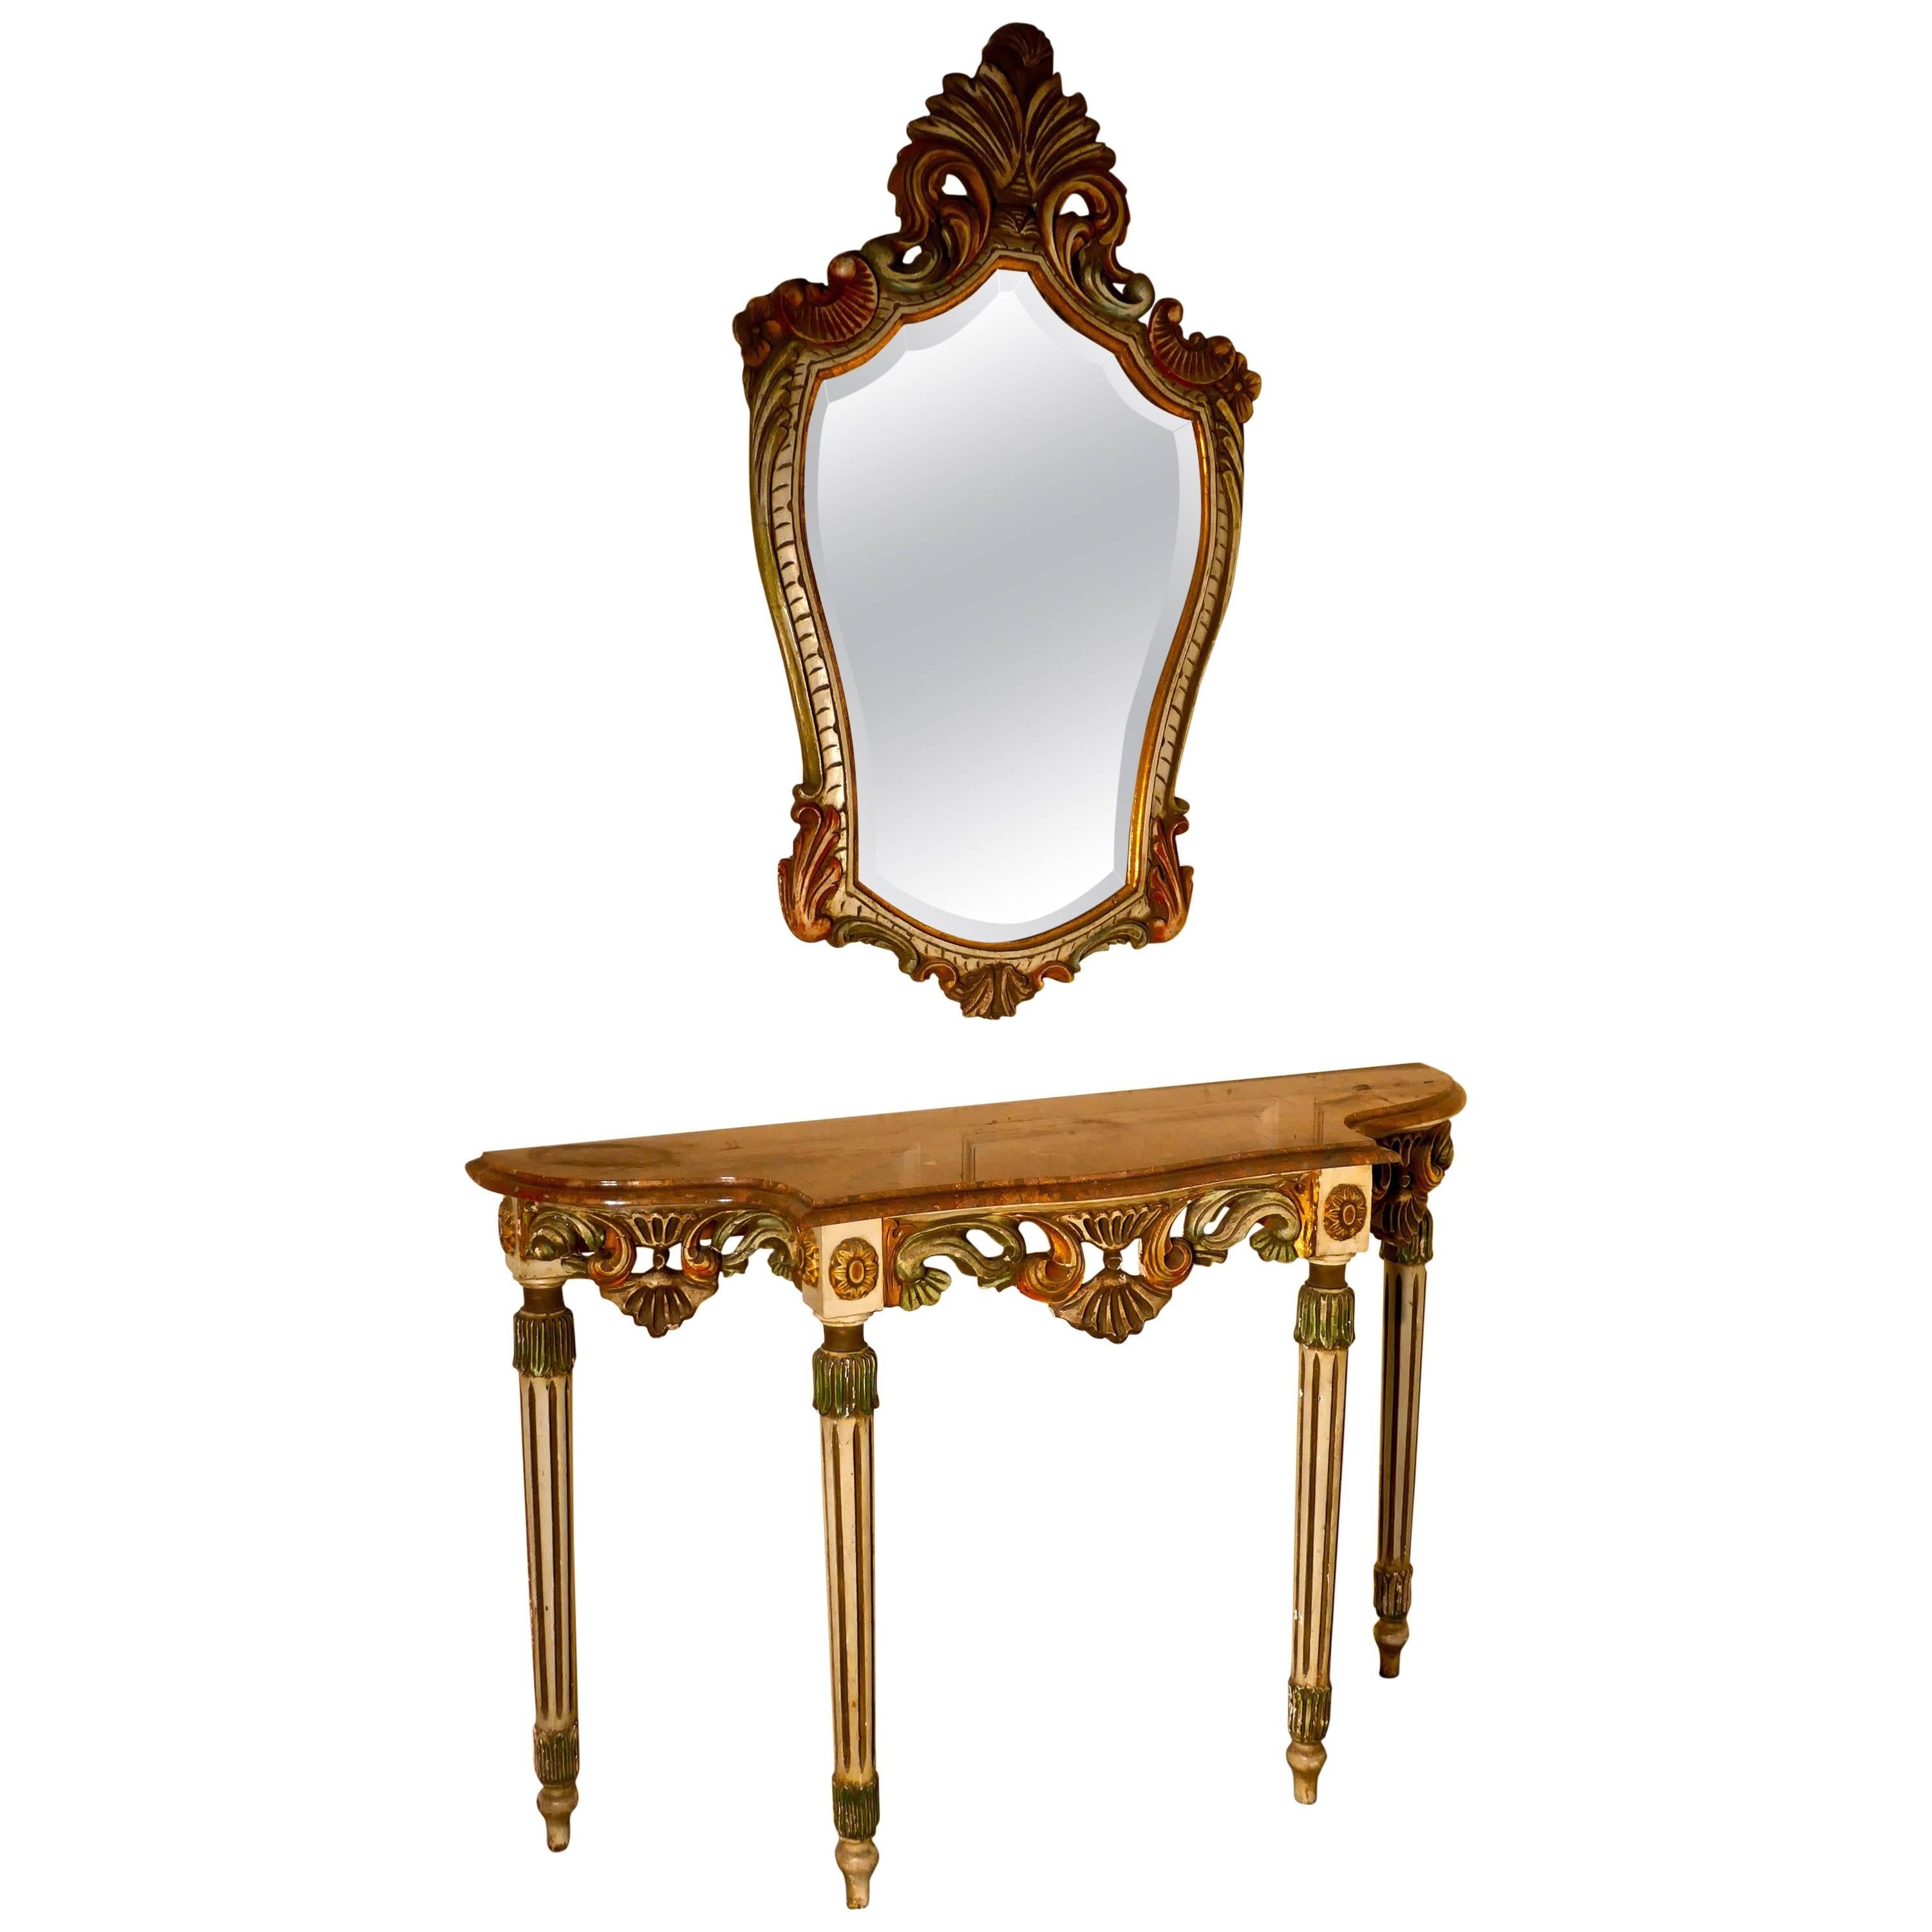 Carved and Painted French Louis Style Console or Hall Table with Matching Mirror